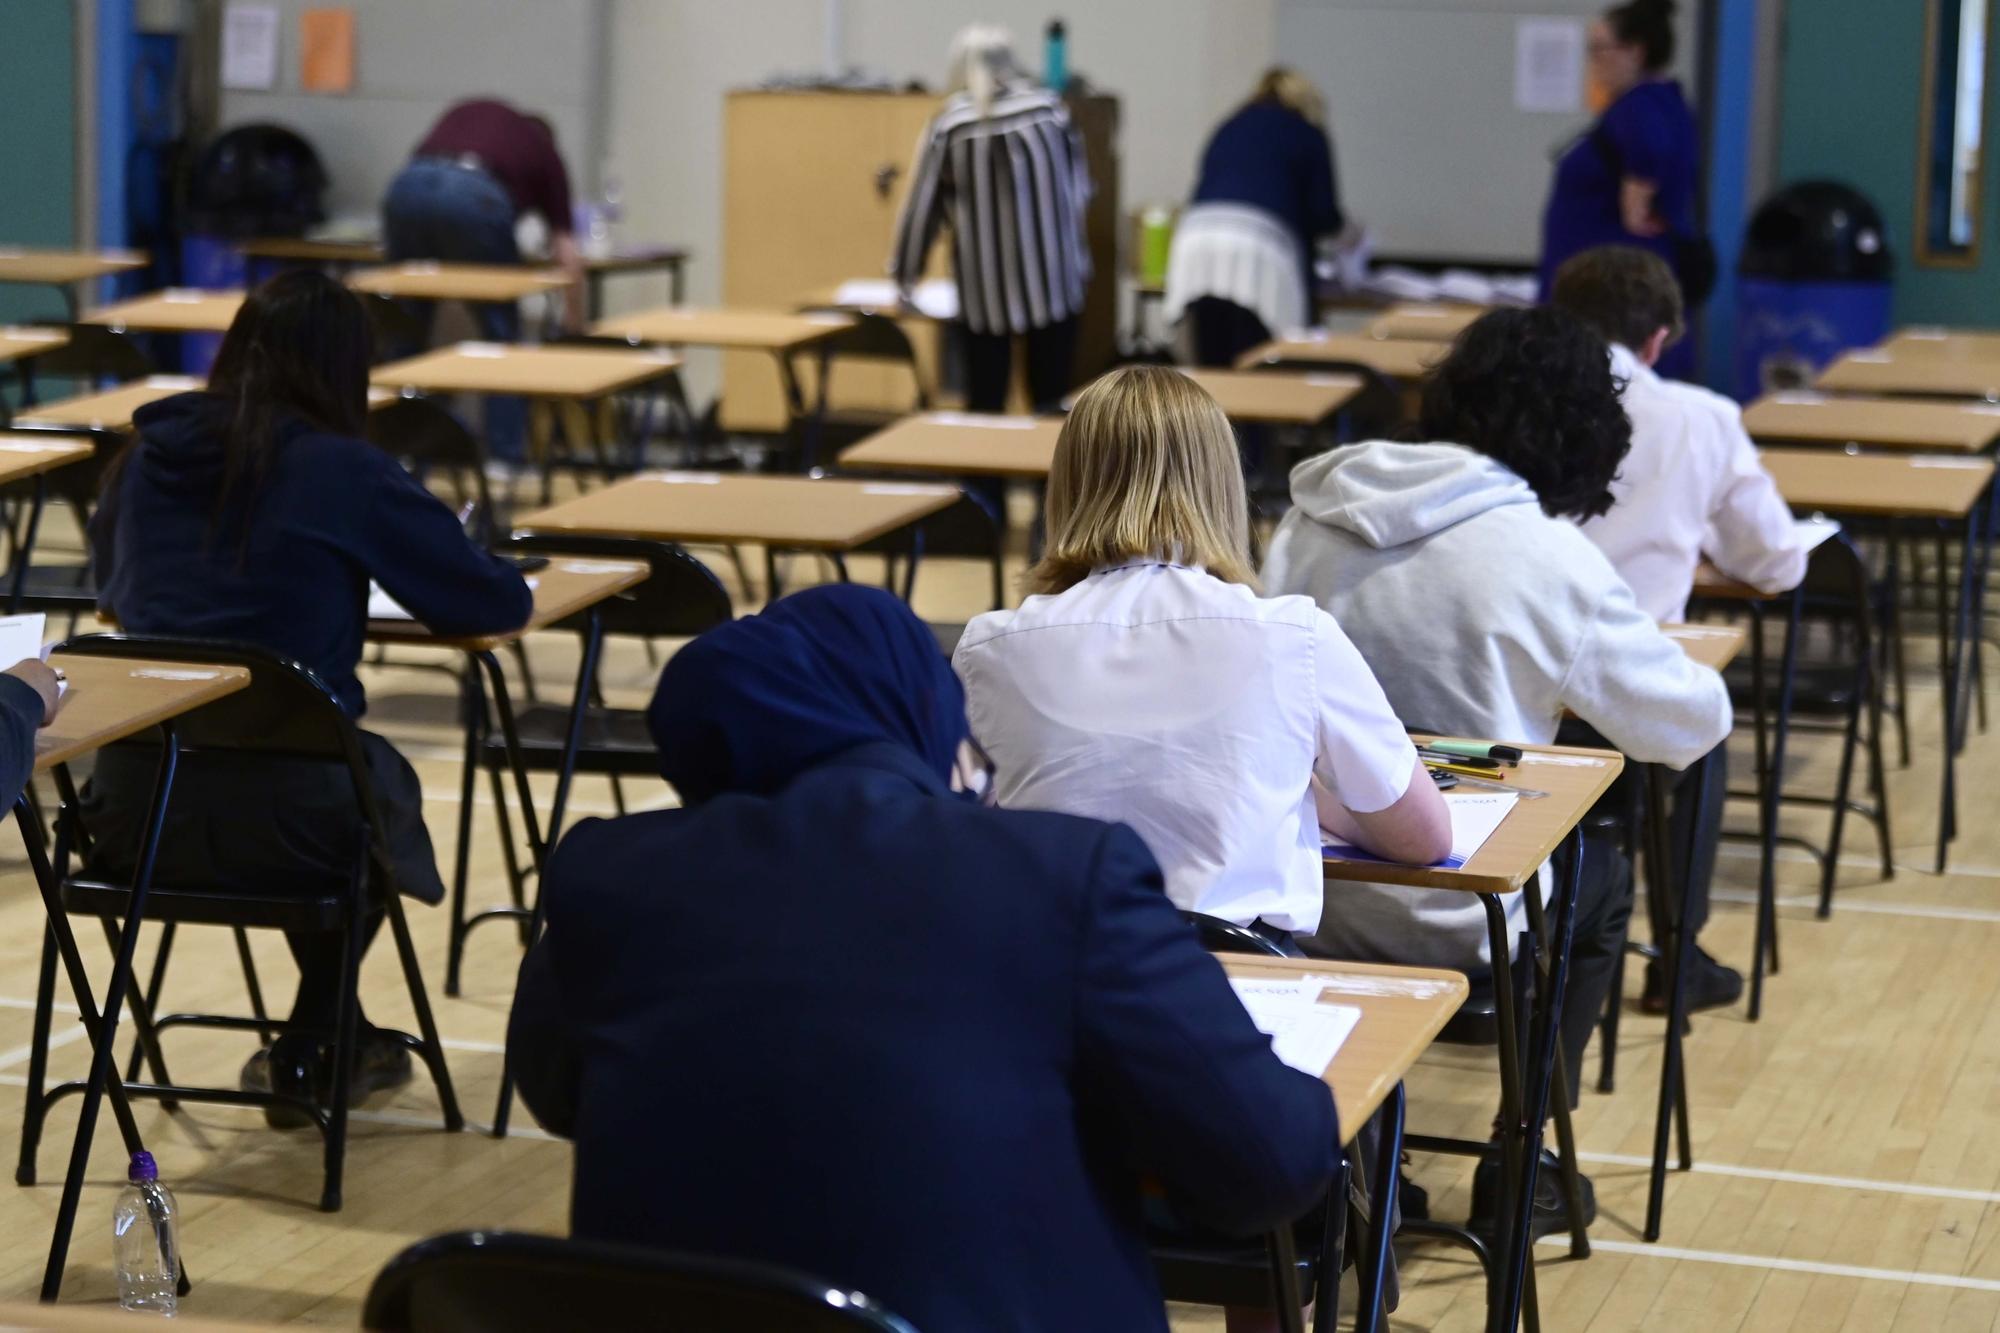 More anxiety around 'higher education and the unknown' impacting young people ahead of exam results day